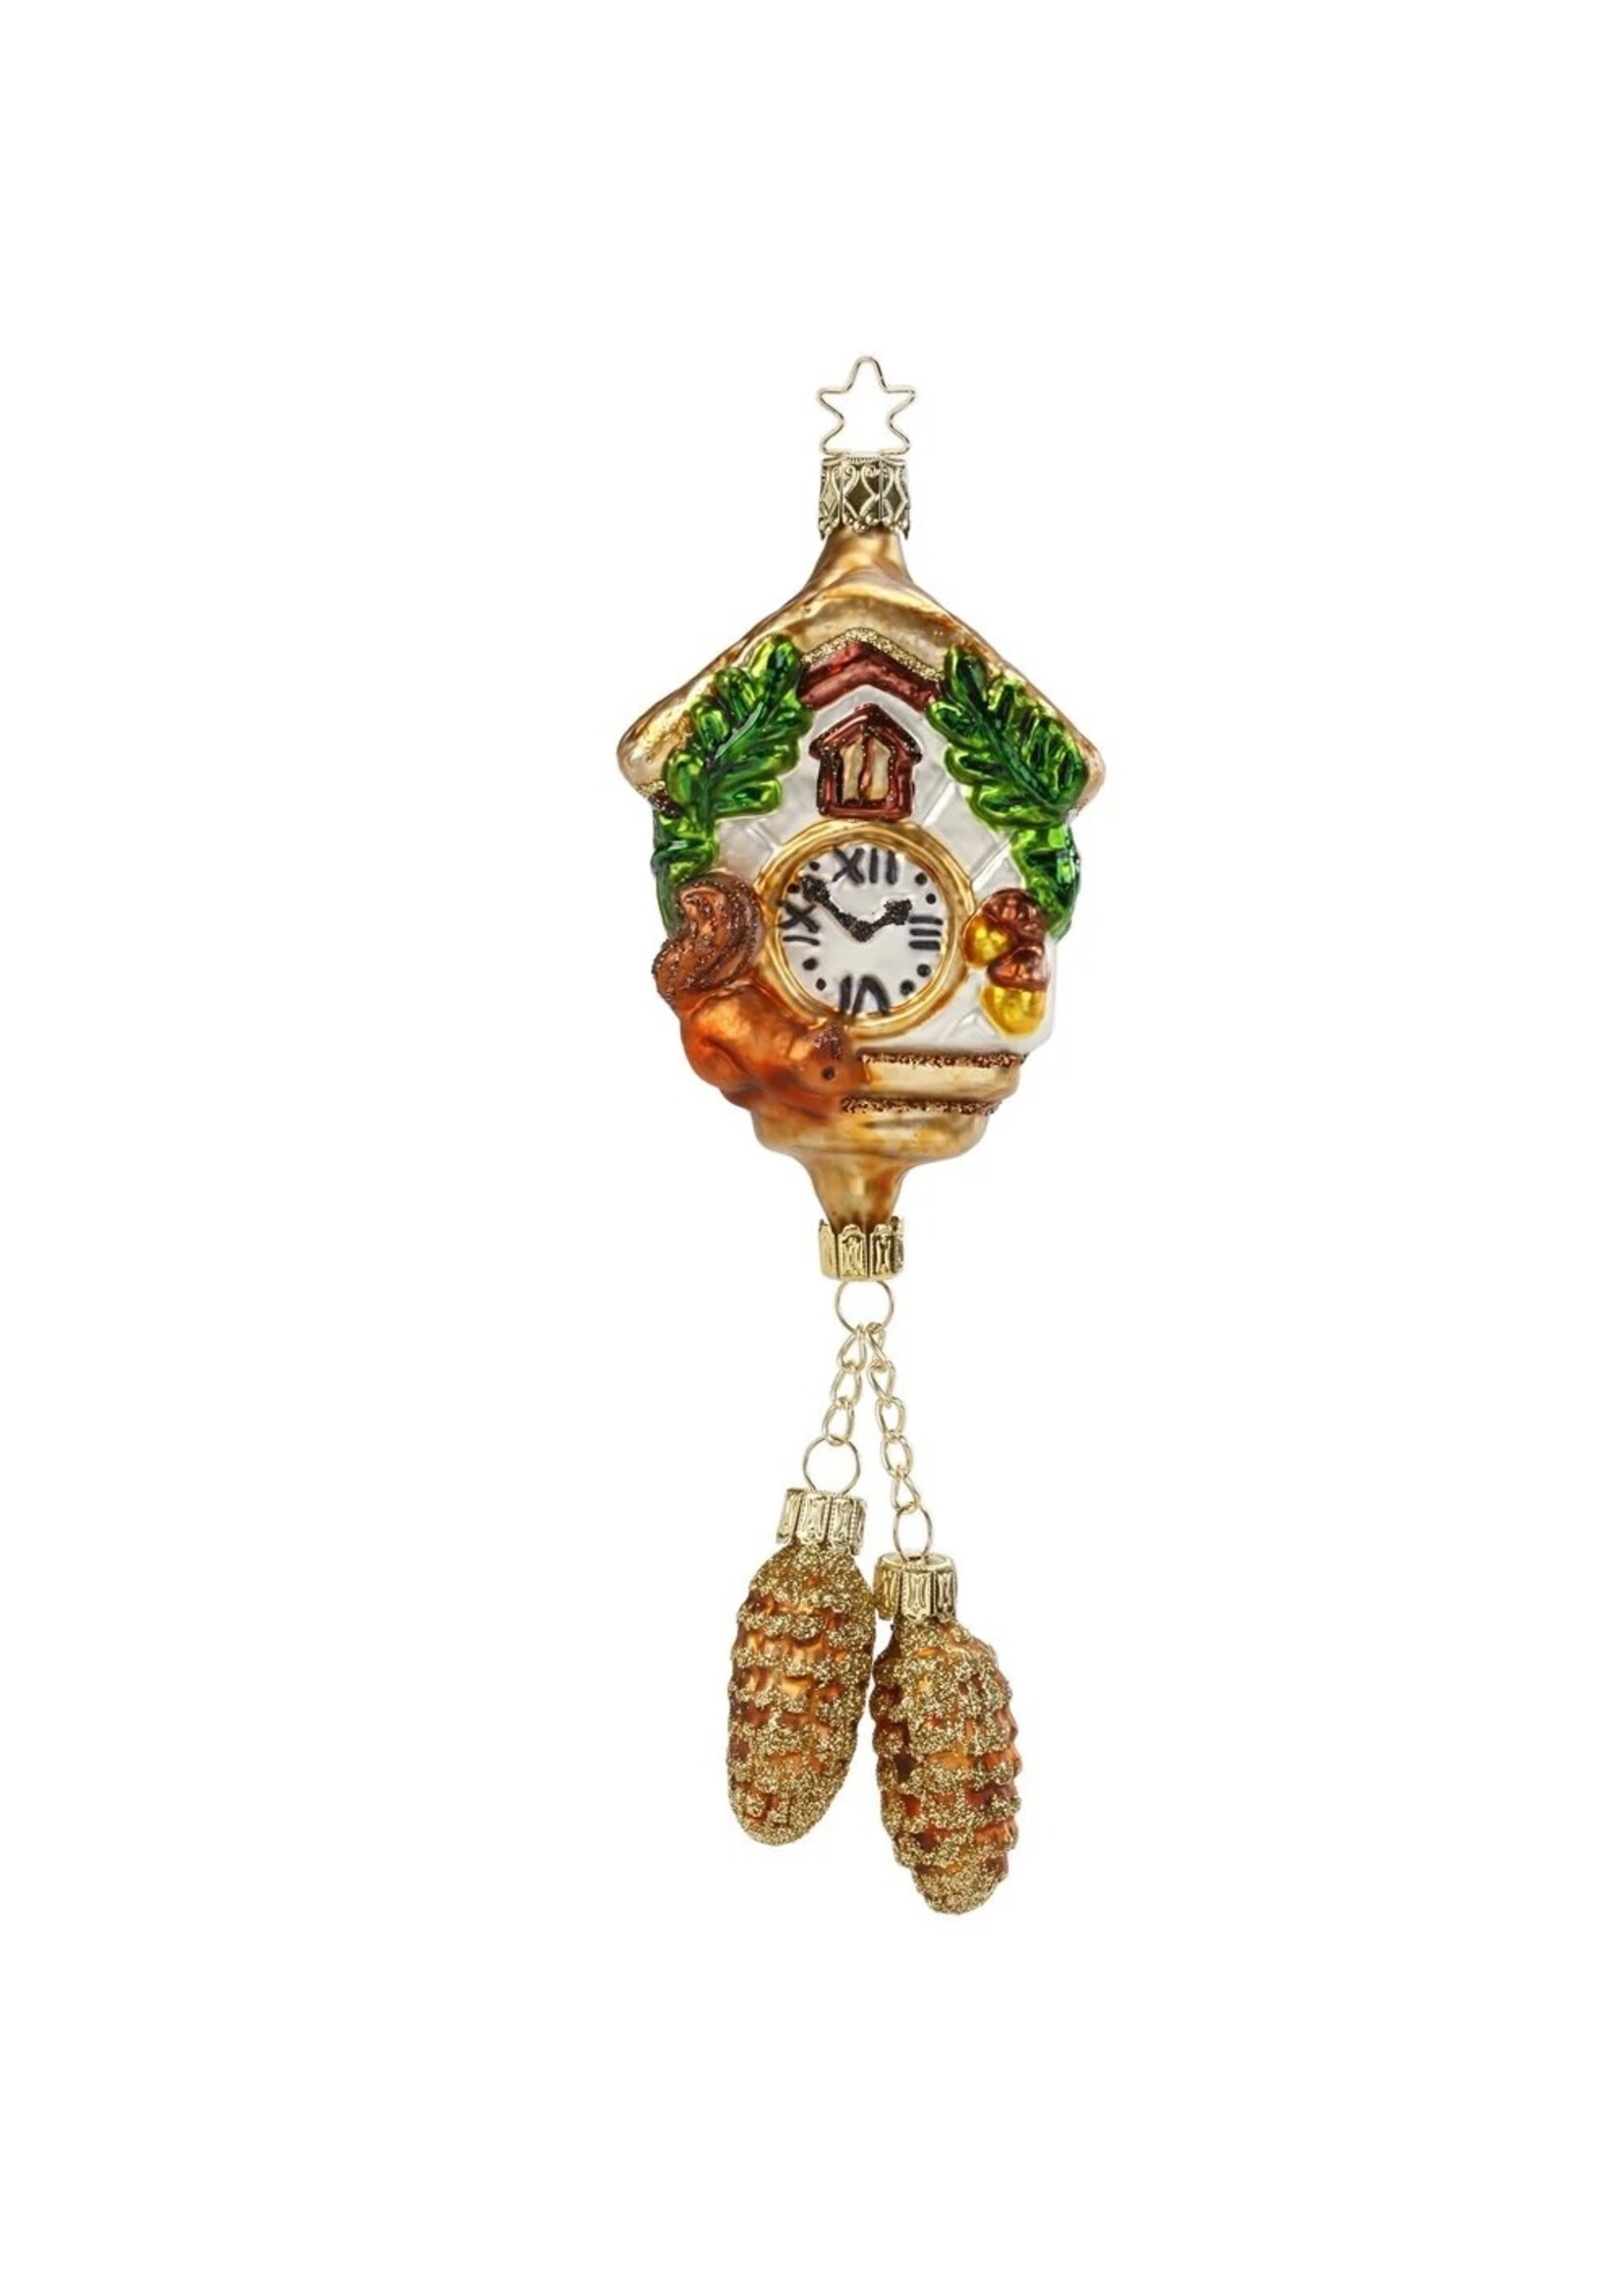 Ornament - Black Forest Charm